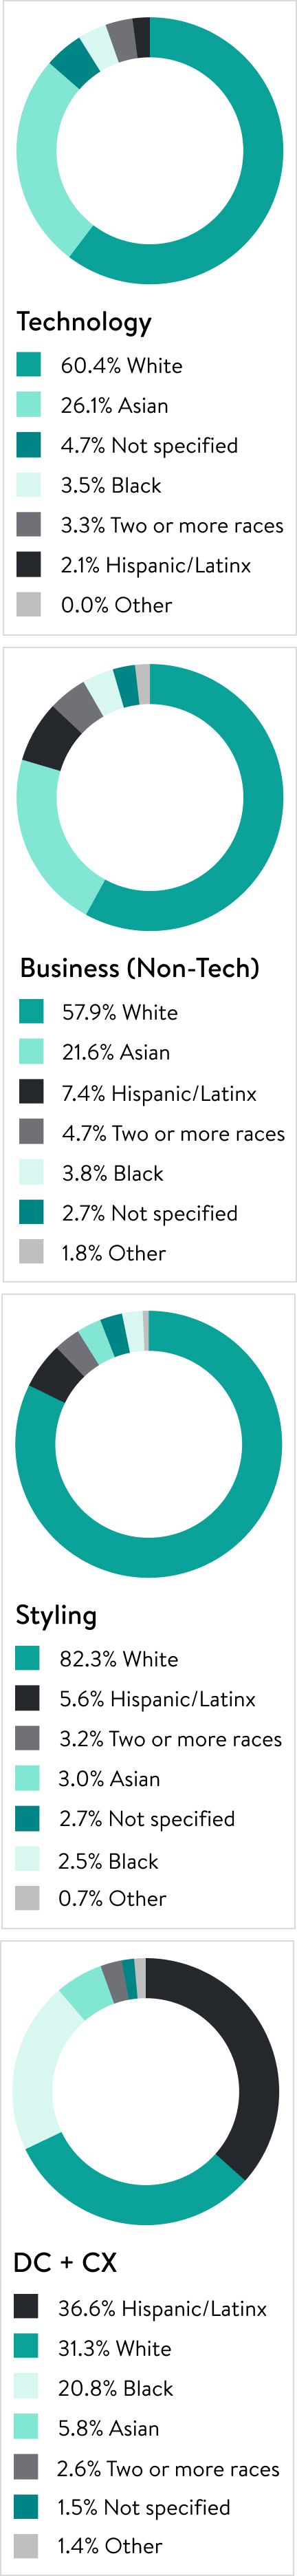 Four pie charts, displaying Racial/Ethnic Representation in Technology, Business (non-Tech), Styling, and Distribution Centers + Customer Experience